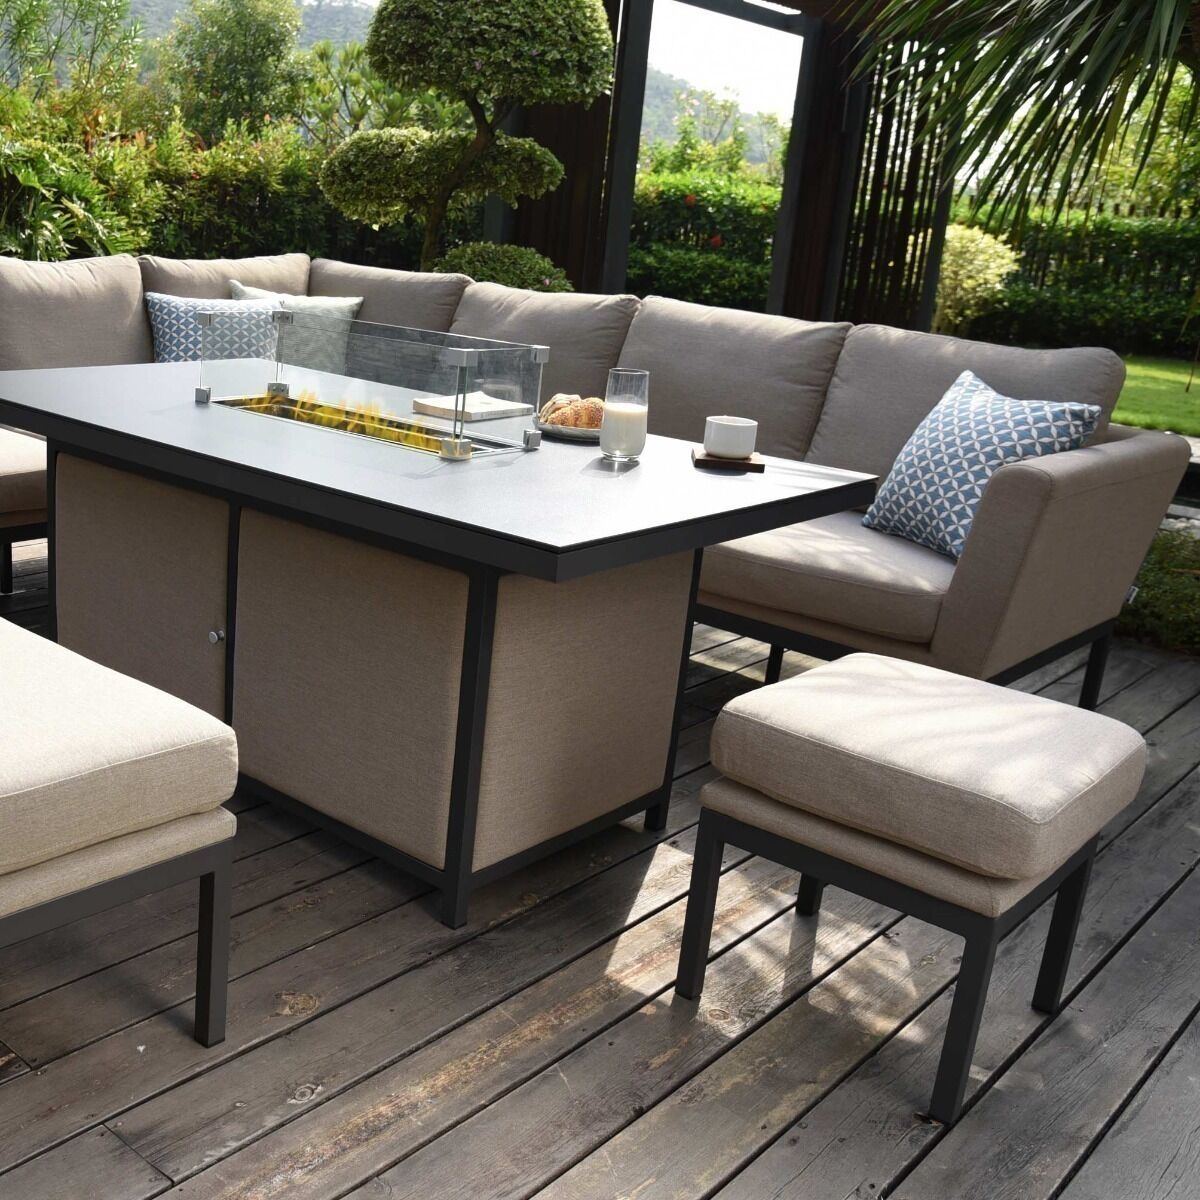 Maze - Outdoor Fabric Pulse Rectangular Corner Dining Set with Fire Pit Table - Taupe product image